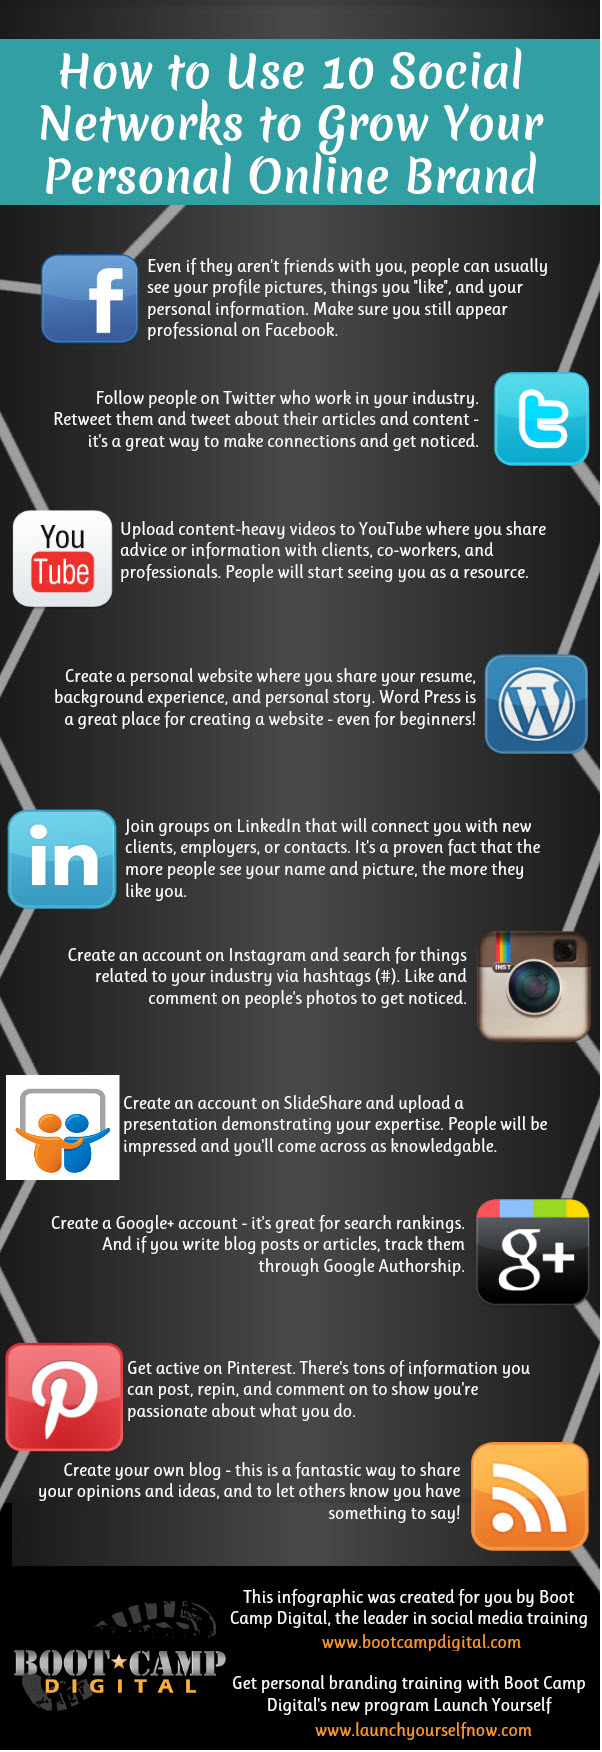 How-to-Use-10-Social-Media-Networks-for-Personal-Online-Branding